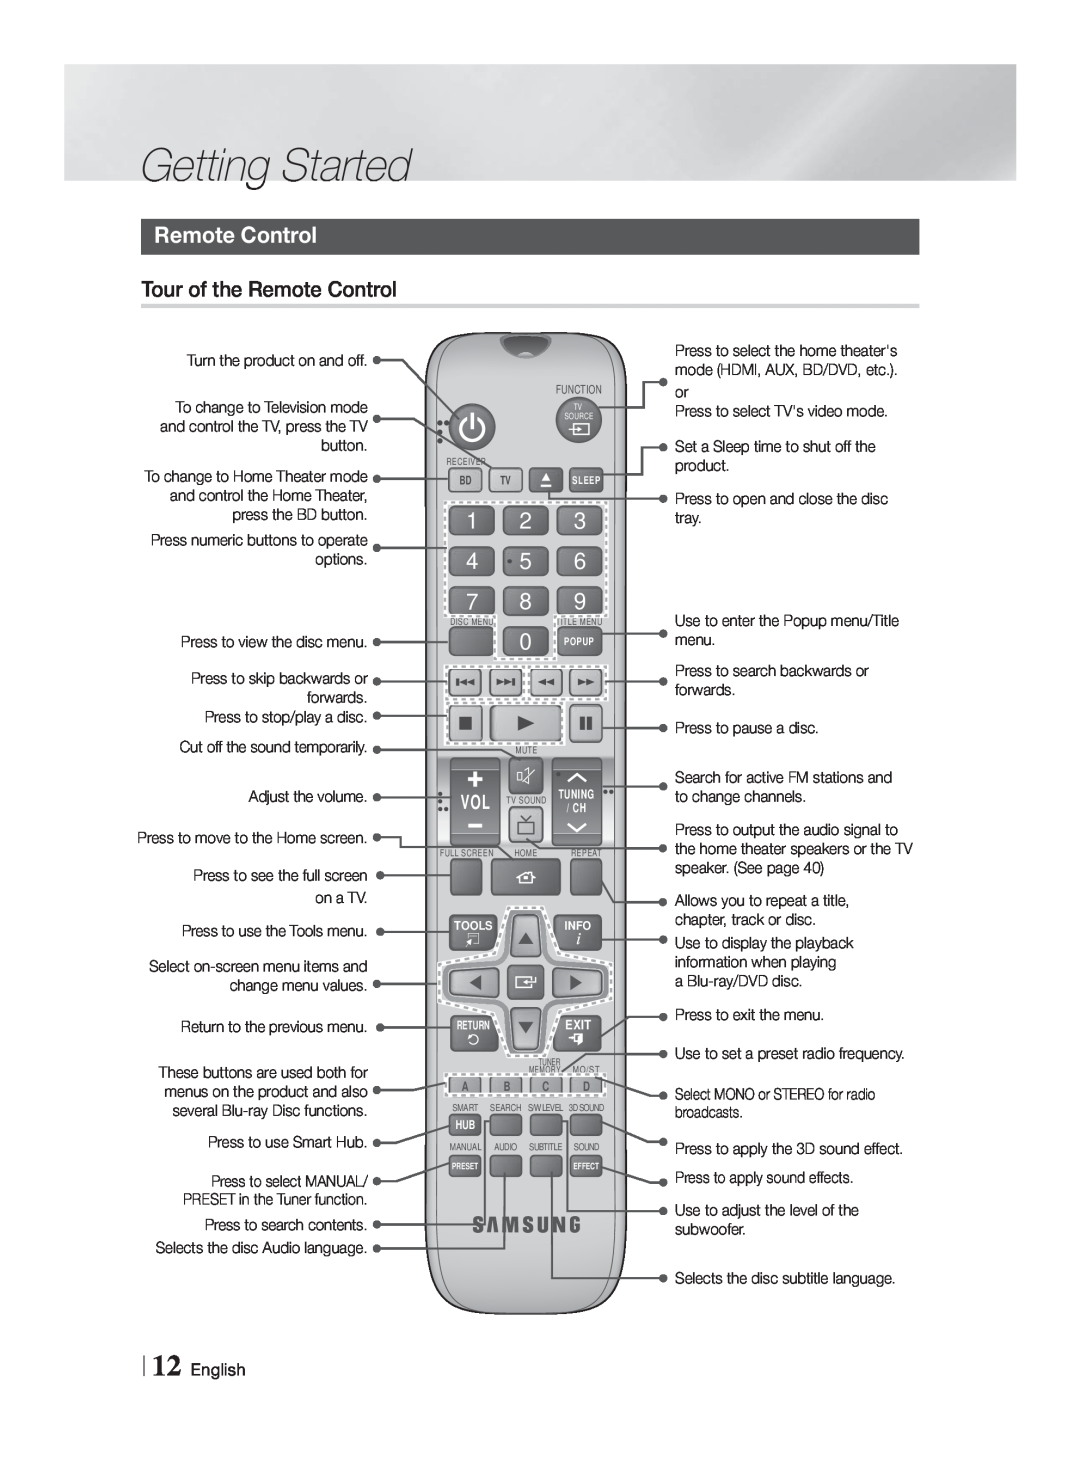 Samsung HT-F5500W, HTF5500WZA user manual Tour of the Remote Control, Getting Started, English 